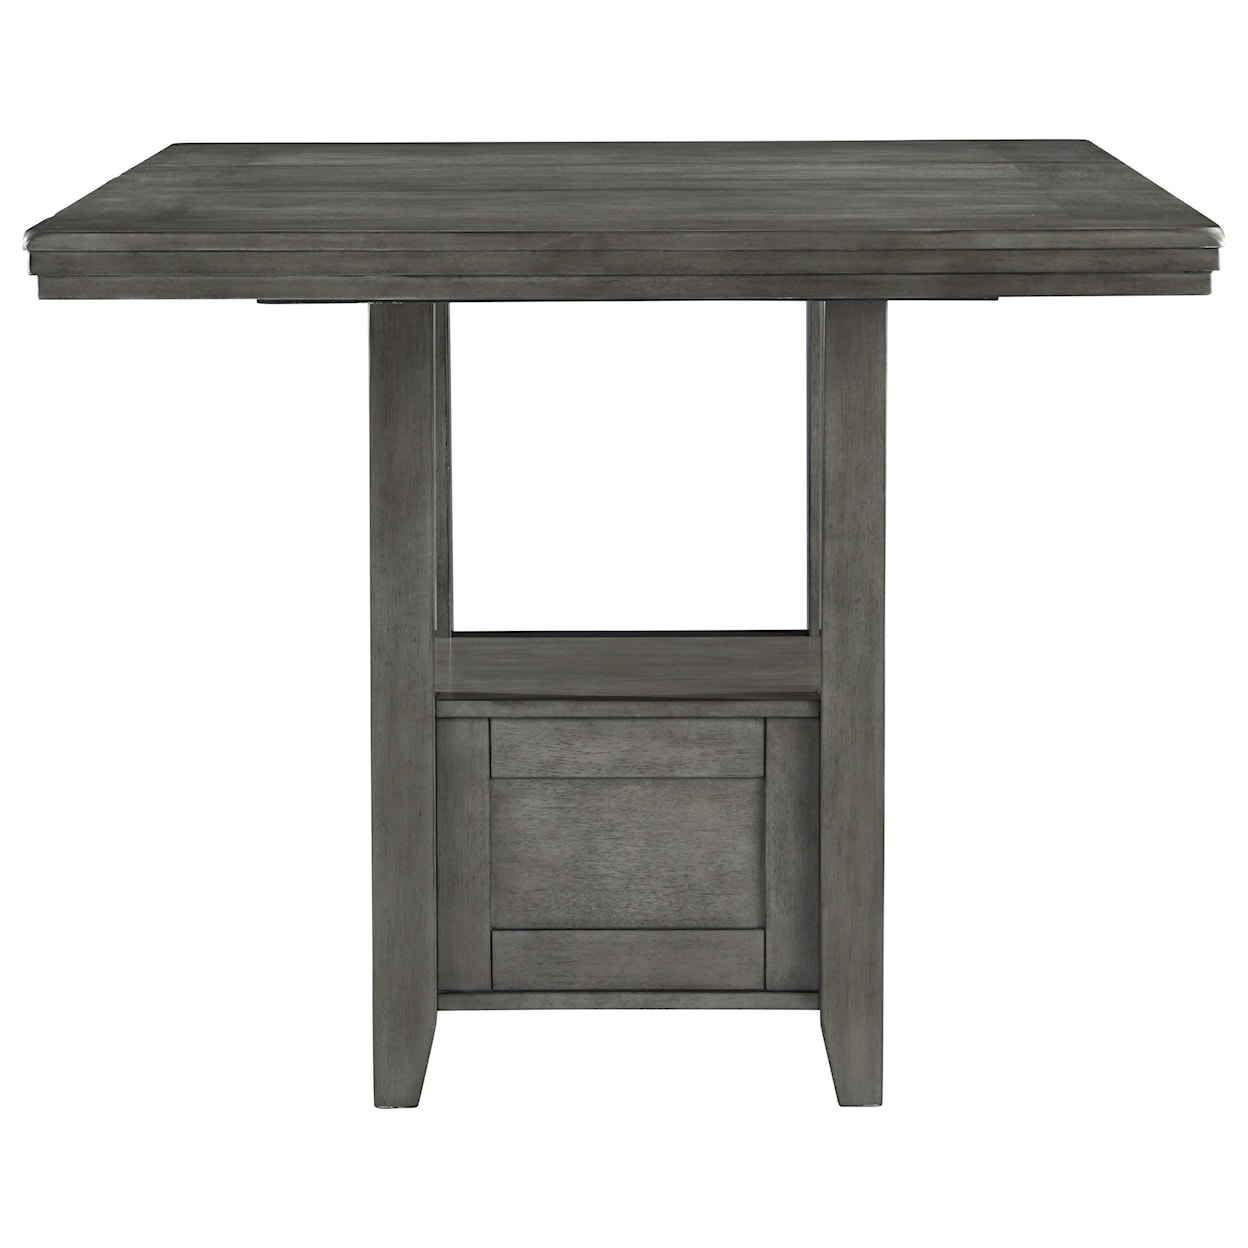 Signature Design by Ashley  Counter Height Dining Table